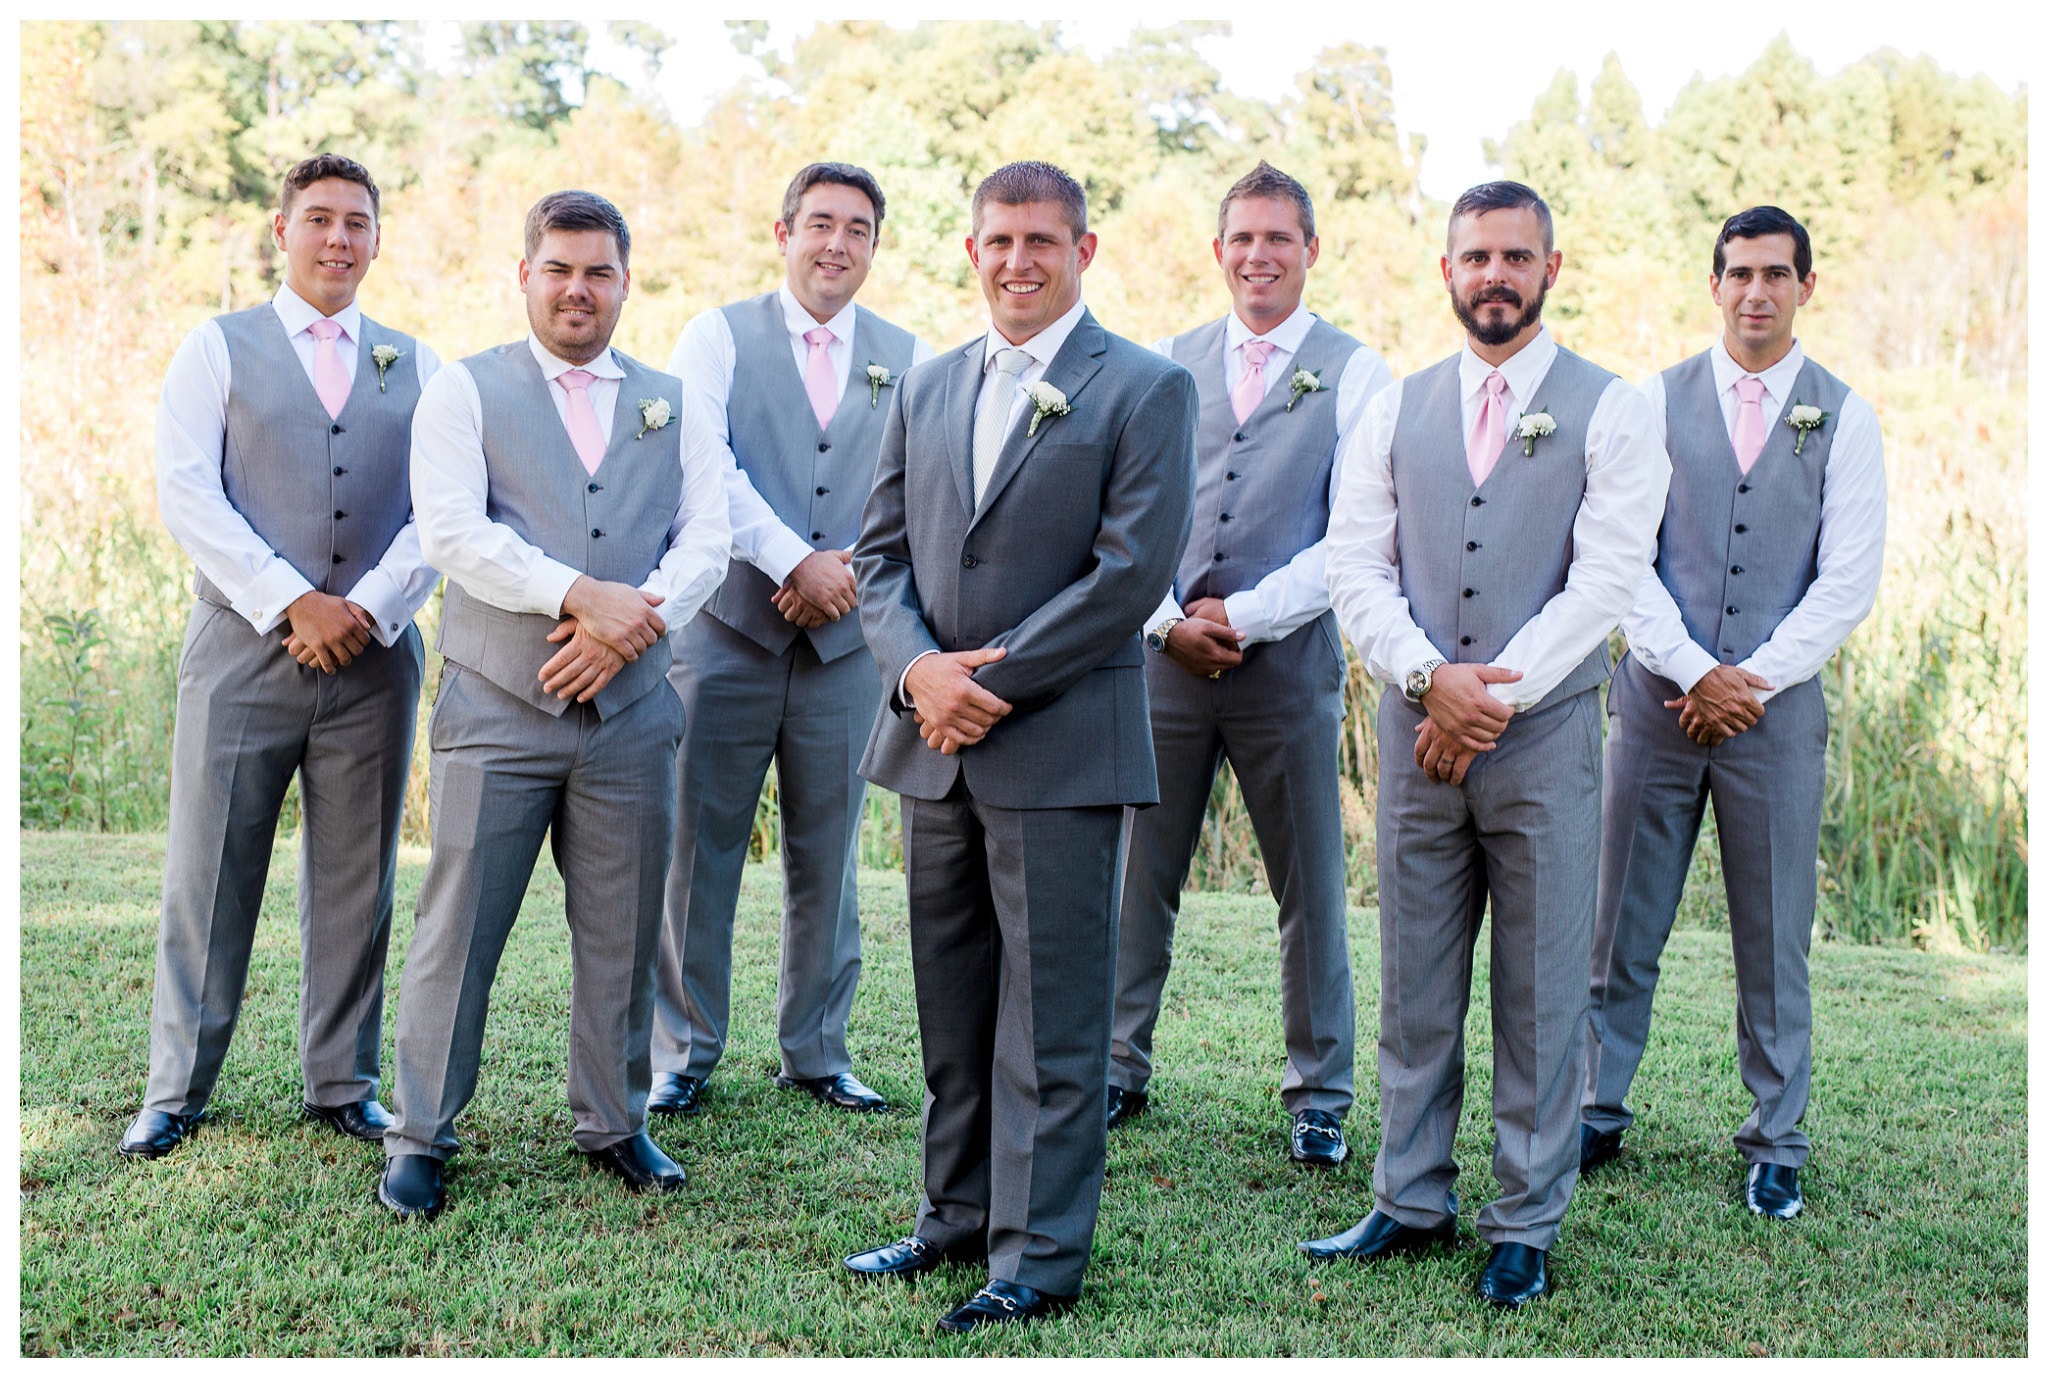 The Groom and His Groomsmen - Kay and Josh's wedding at the Heritage Plantation, Pawleys Island, South Carolina on September 19, 2015 Heritage Plantation Southern wedding, Pawleys Island, South Carolina Venue and Catering: Heritage Club, Pawleys Island Music: Paul Matthews Entertainment Brides dress: The Little White Dress Cake: Buttercream Cakes and Catering Event Rentals: Eventworks Photographer: One Life Photography